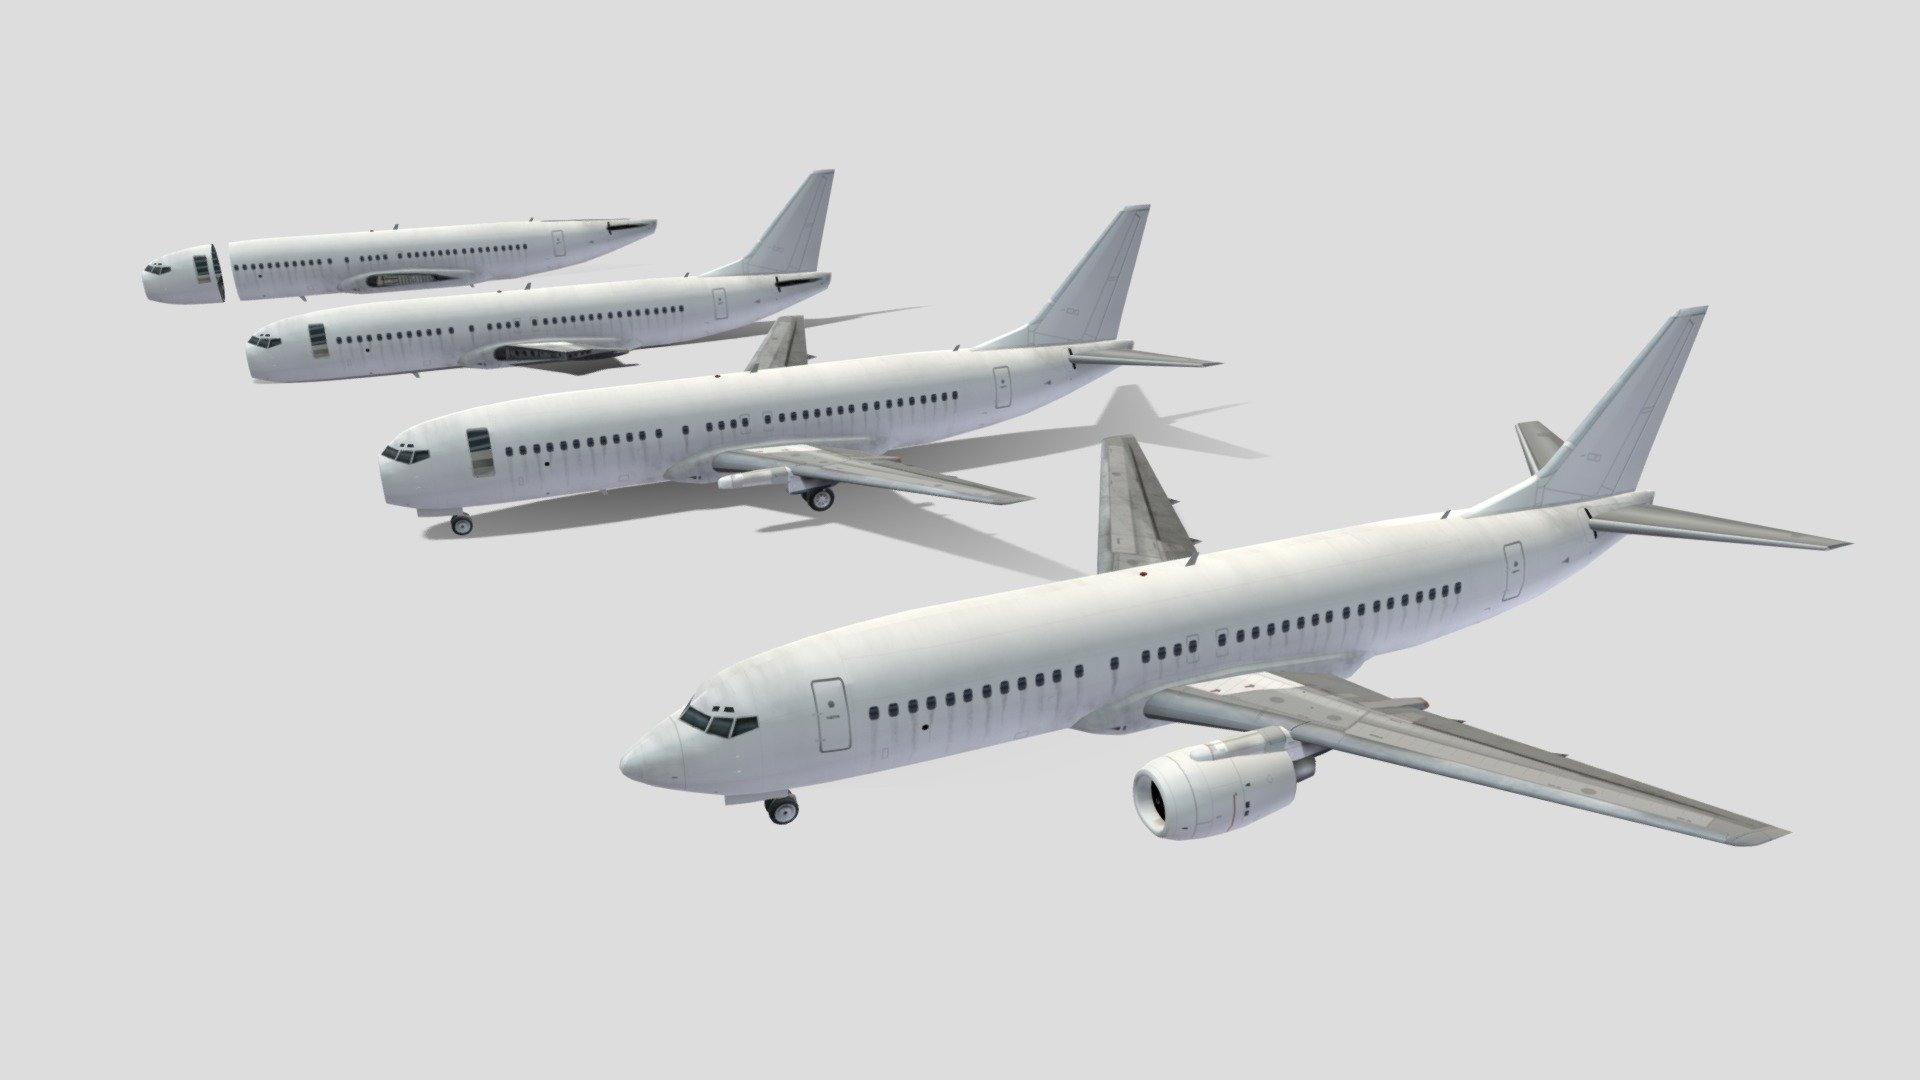 This is a 3D low-poly model of a Boeing 737-400, optimized for minimal complexity with less than 5000 polygons. Despite its low polygon count, the model accurately captures the iconic design and aerodynamic features of the Boeing 737-400, making it ideal for real-time rendering in games or simulations.

it can be used as a whole together but also has separated and dedicated parts in various standard formats contains two scenes that have a group of scrapped planes, in case you don't know or don't want to remove parts from the set provided

It comes with a blank layered base (albedo) texture, providing a clean slate for customization. This allows you to apply your own color schemes, decals, or airline branding. The layered structure of the texture file offers flexibility in modifying different parts of the aircraft separately

Static, non rigged, Lowpoly mesh, blank texture, for Asobo Microsoft MSFS or Laminar Research XPlane Scenery Airport development , standard materials - Boeing 737-400 Static Boneyard Blank Low-poly - Buy Royalty Free 3D model by hangarcerouno 3d model